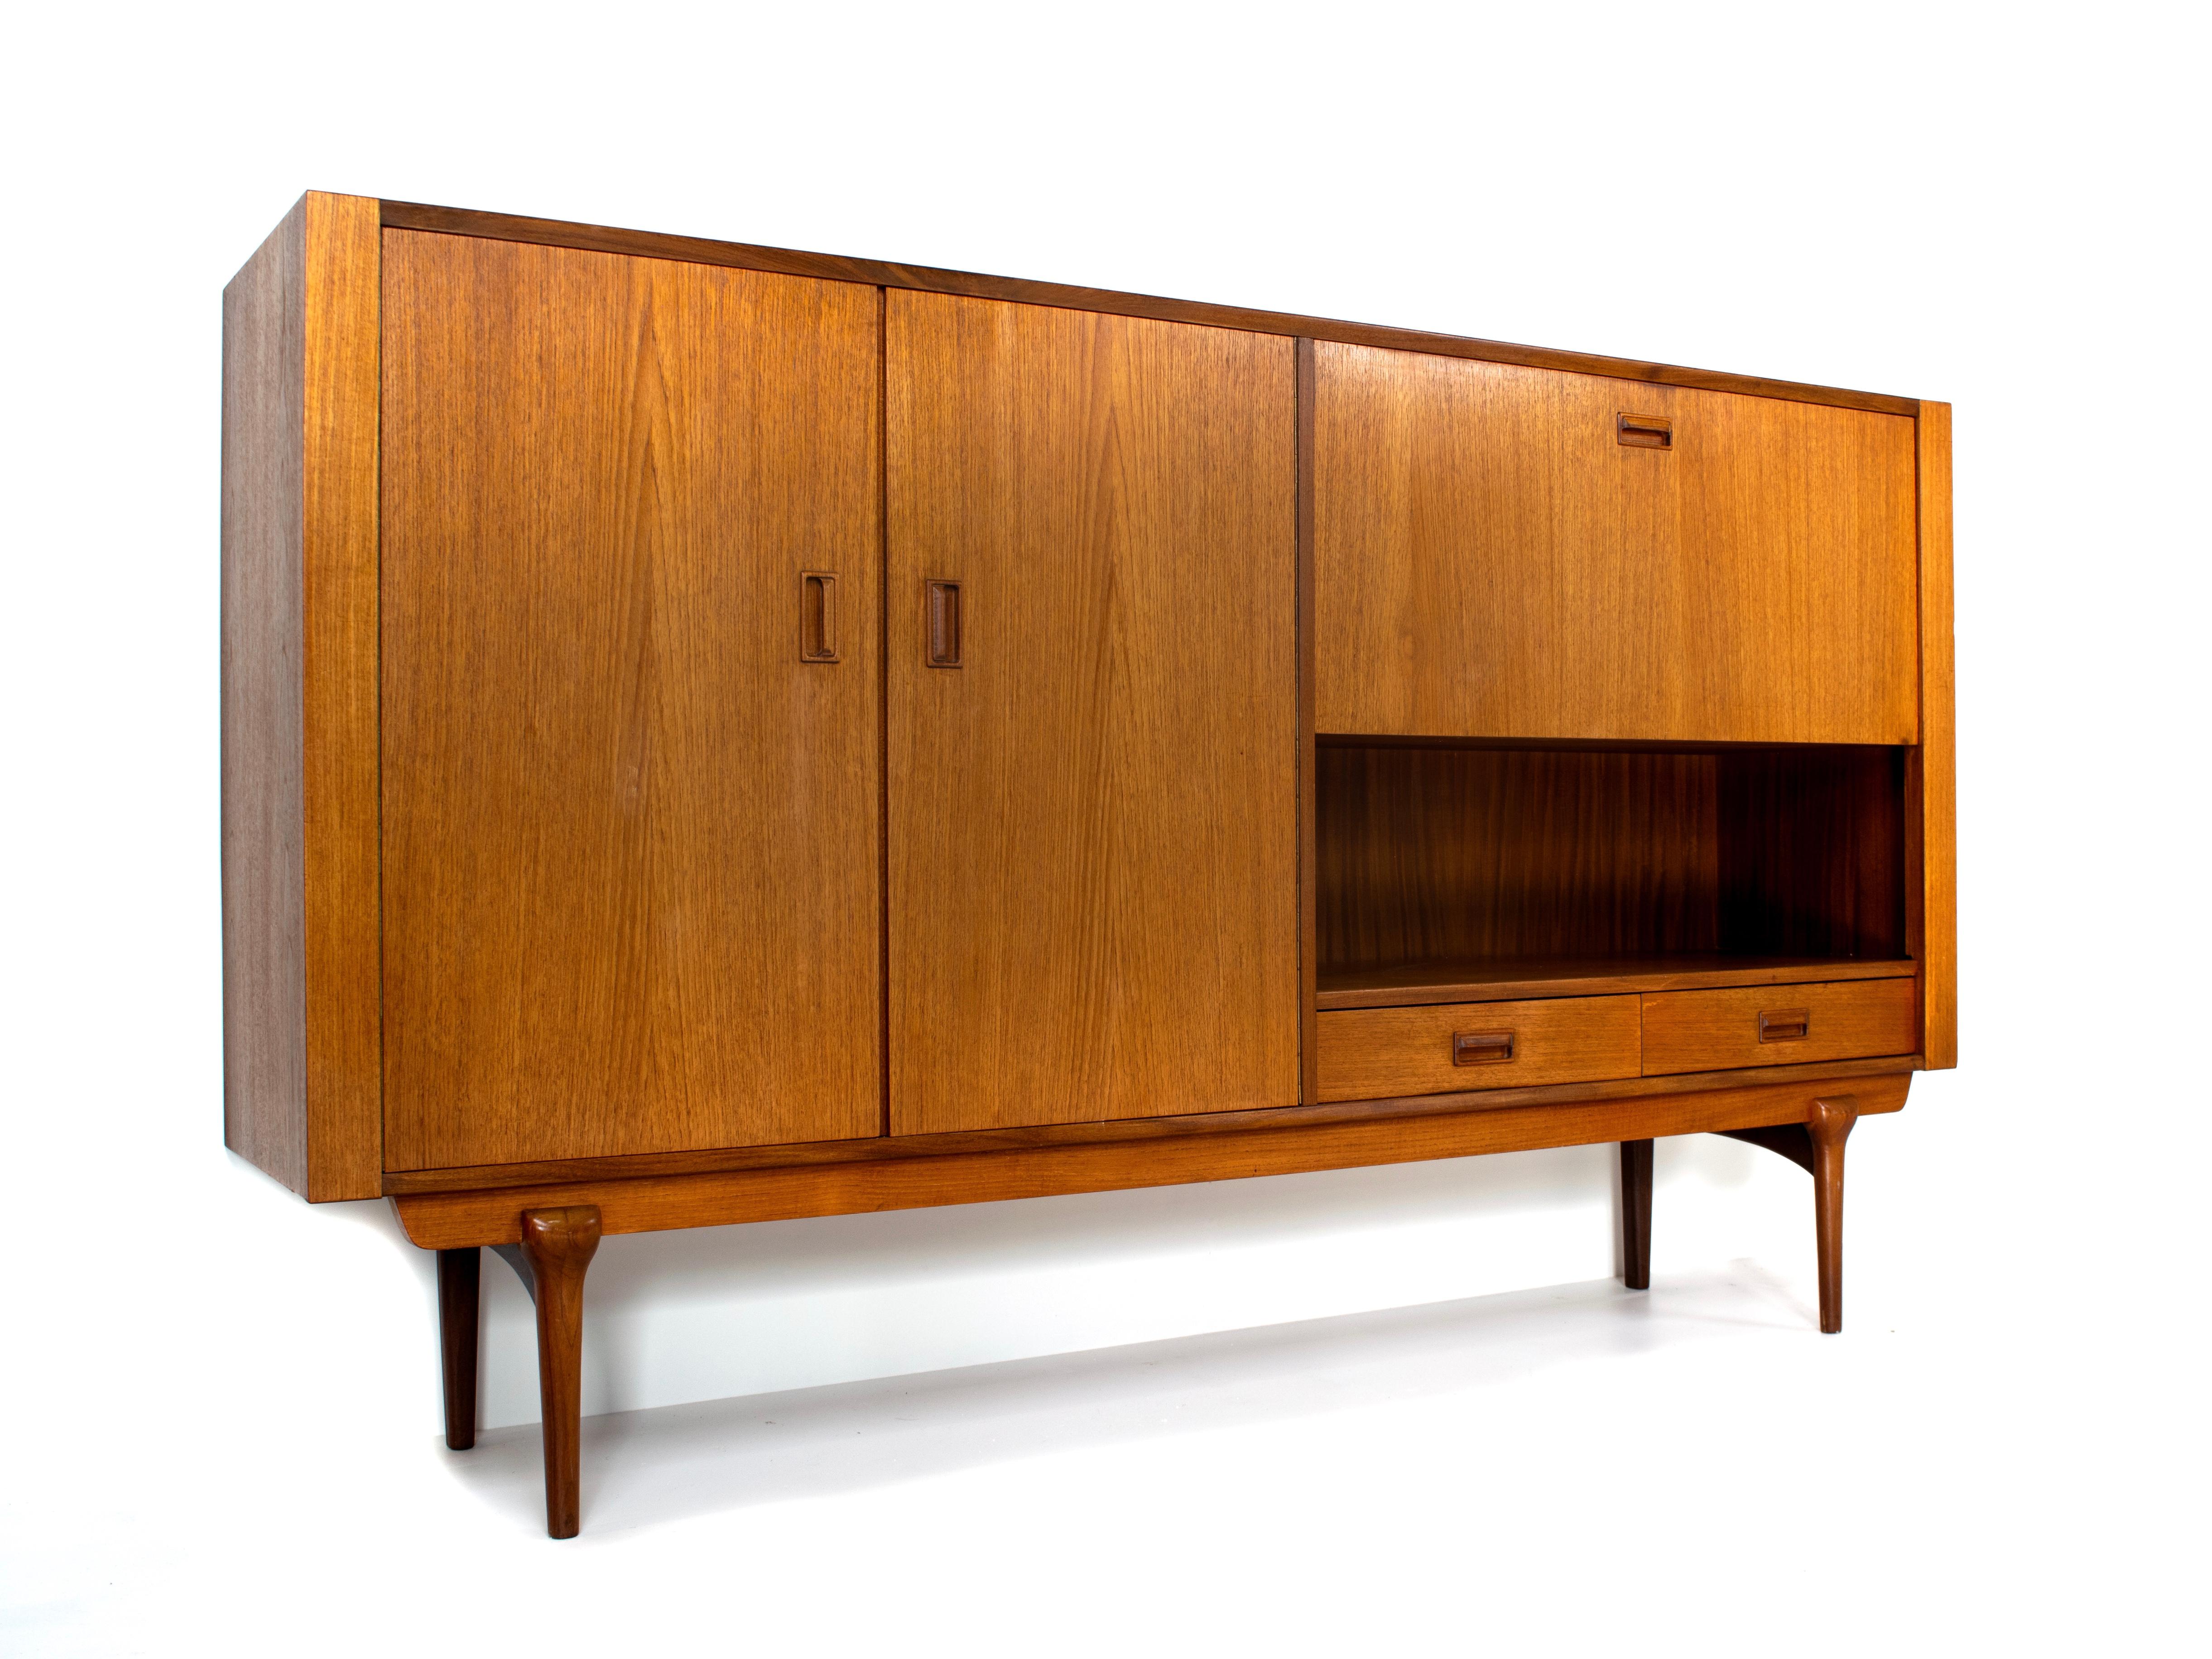 Nice highboard in teak by Topform, The Netherlands, 1960s. This highboard has the very recognizable Dutch style that is inspired by Danish design of that time. Famous designer Louis van Teeffelen designed a lot of furniture for Topform and this